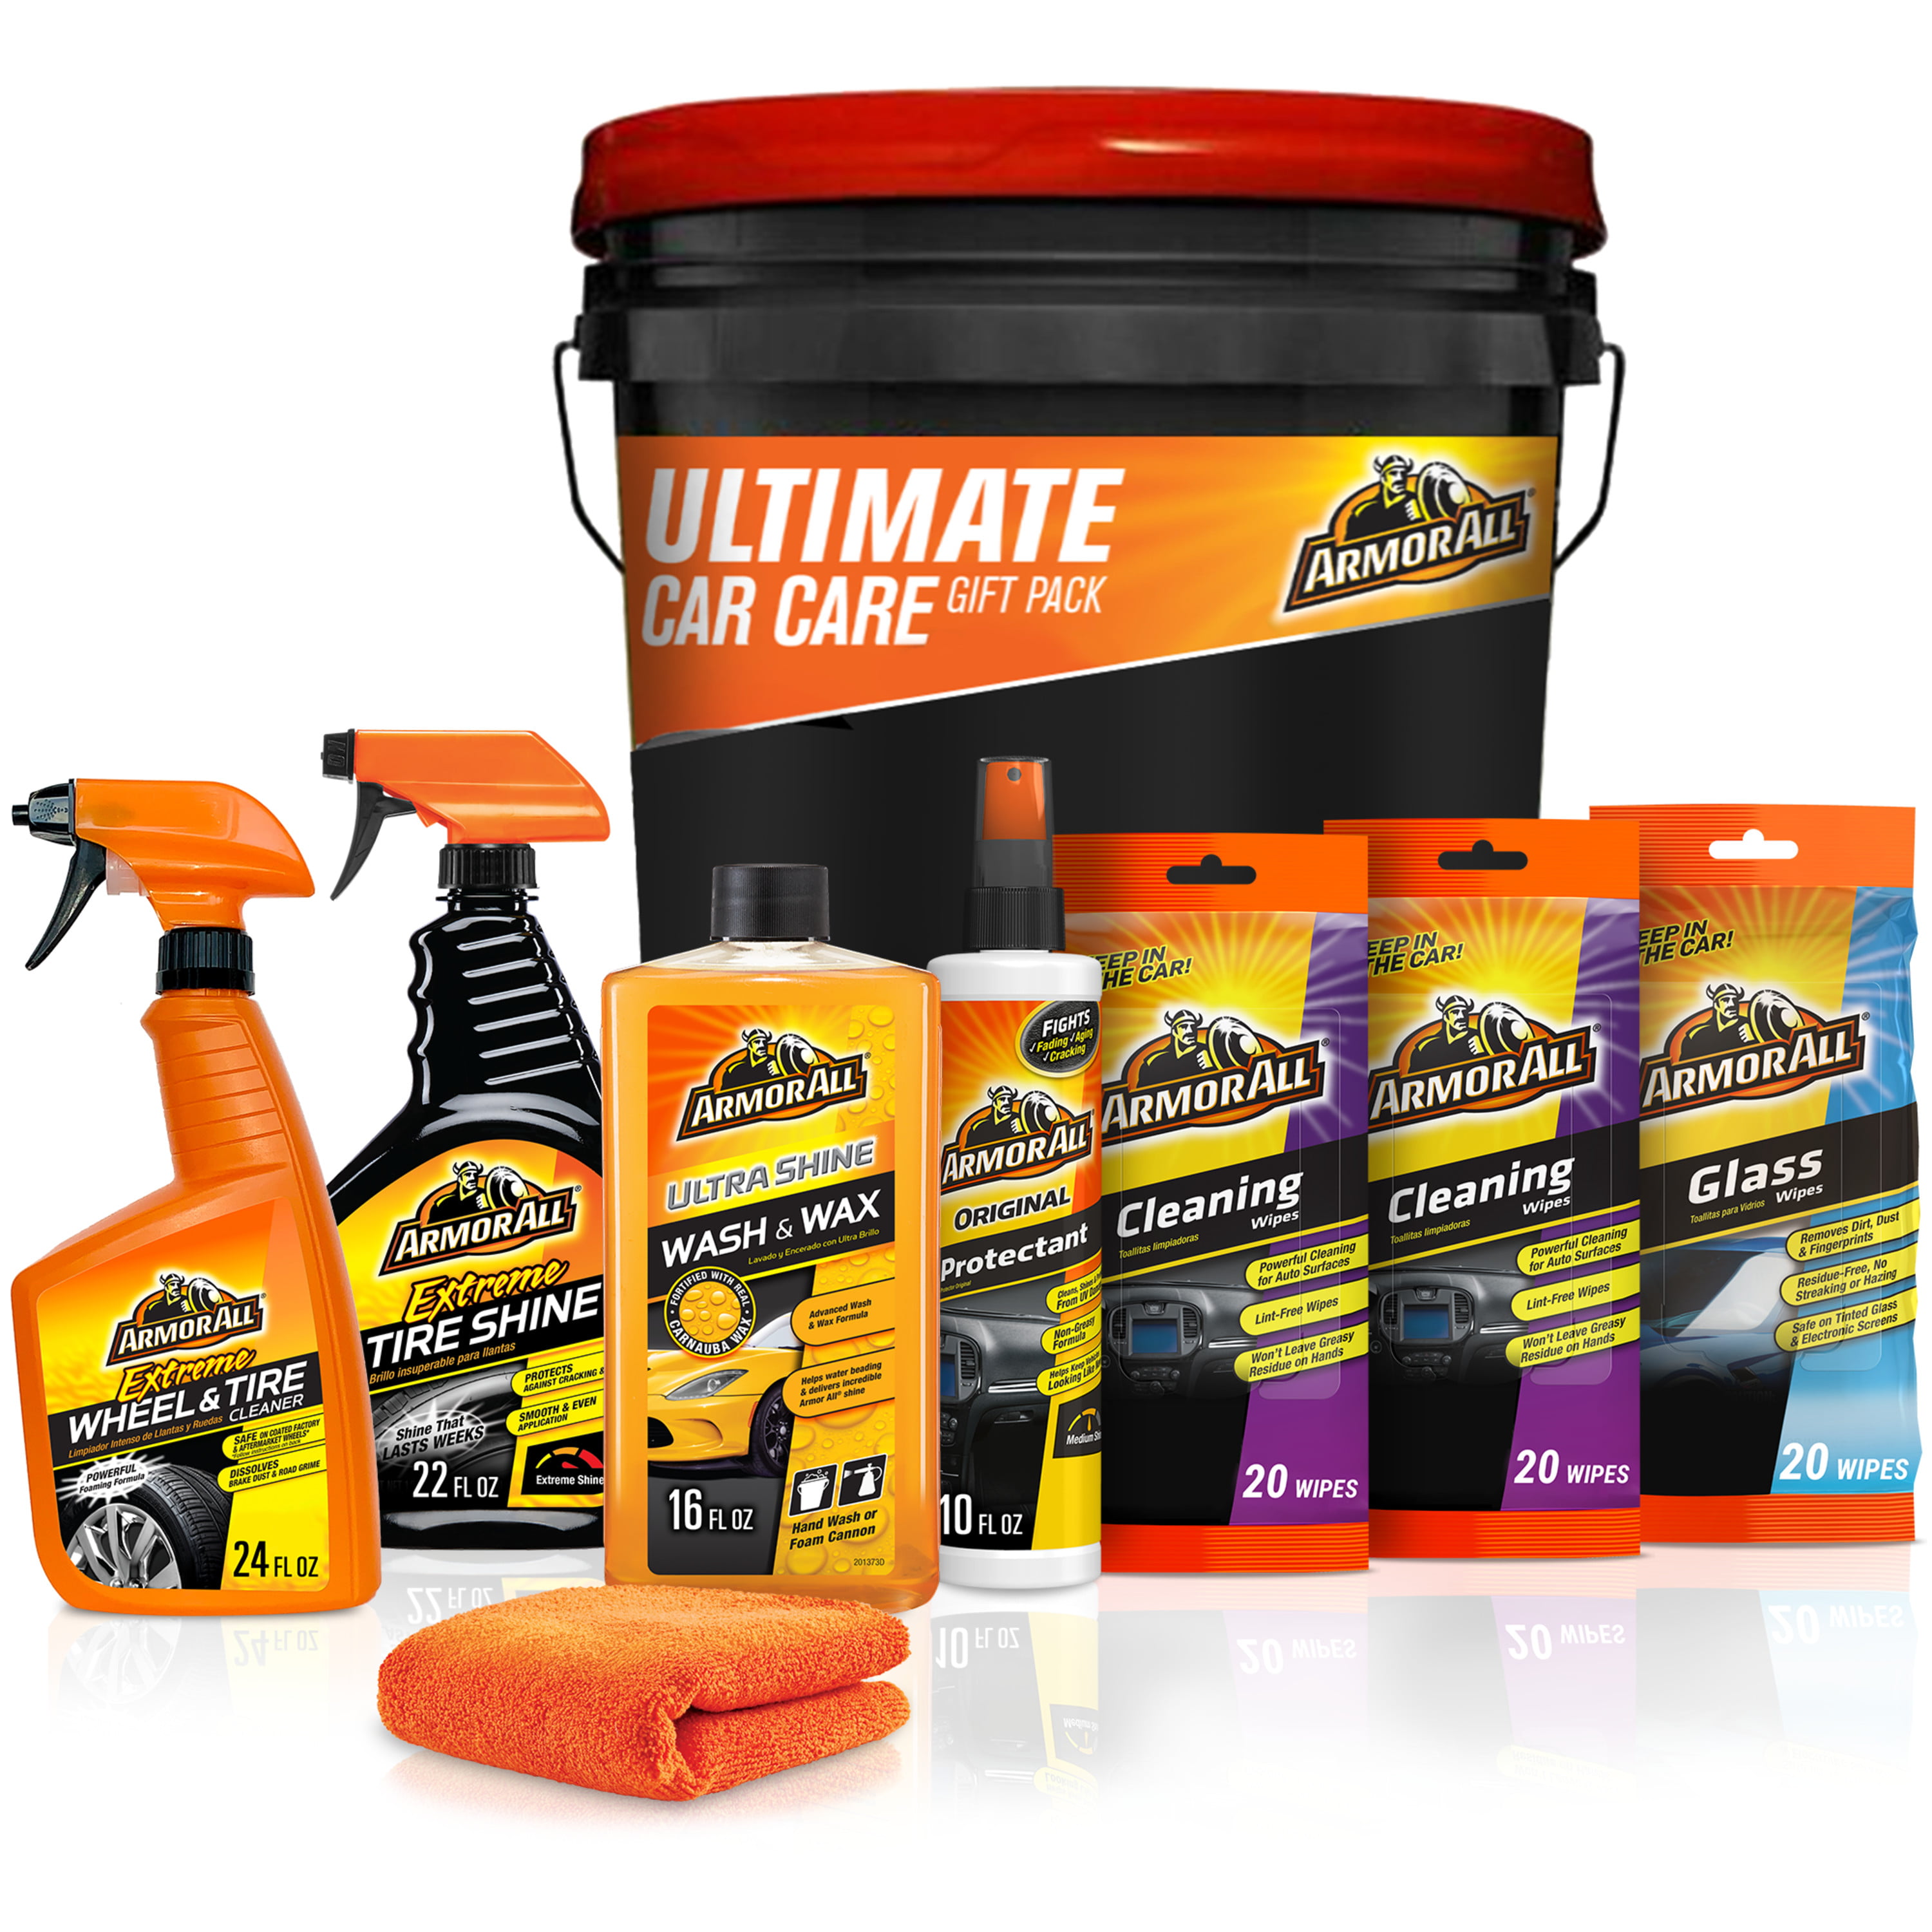 10-Pc Armor All Ultimate Car Care Set $22.90 + Free Shipping w/ Walmart+ or Orders $35+